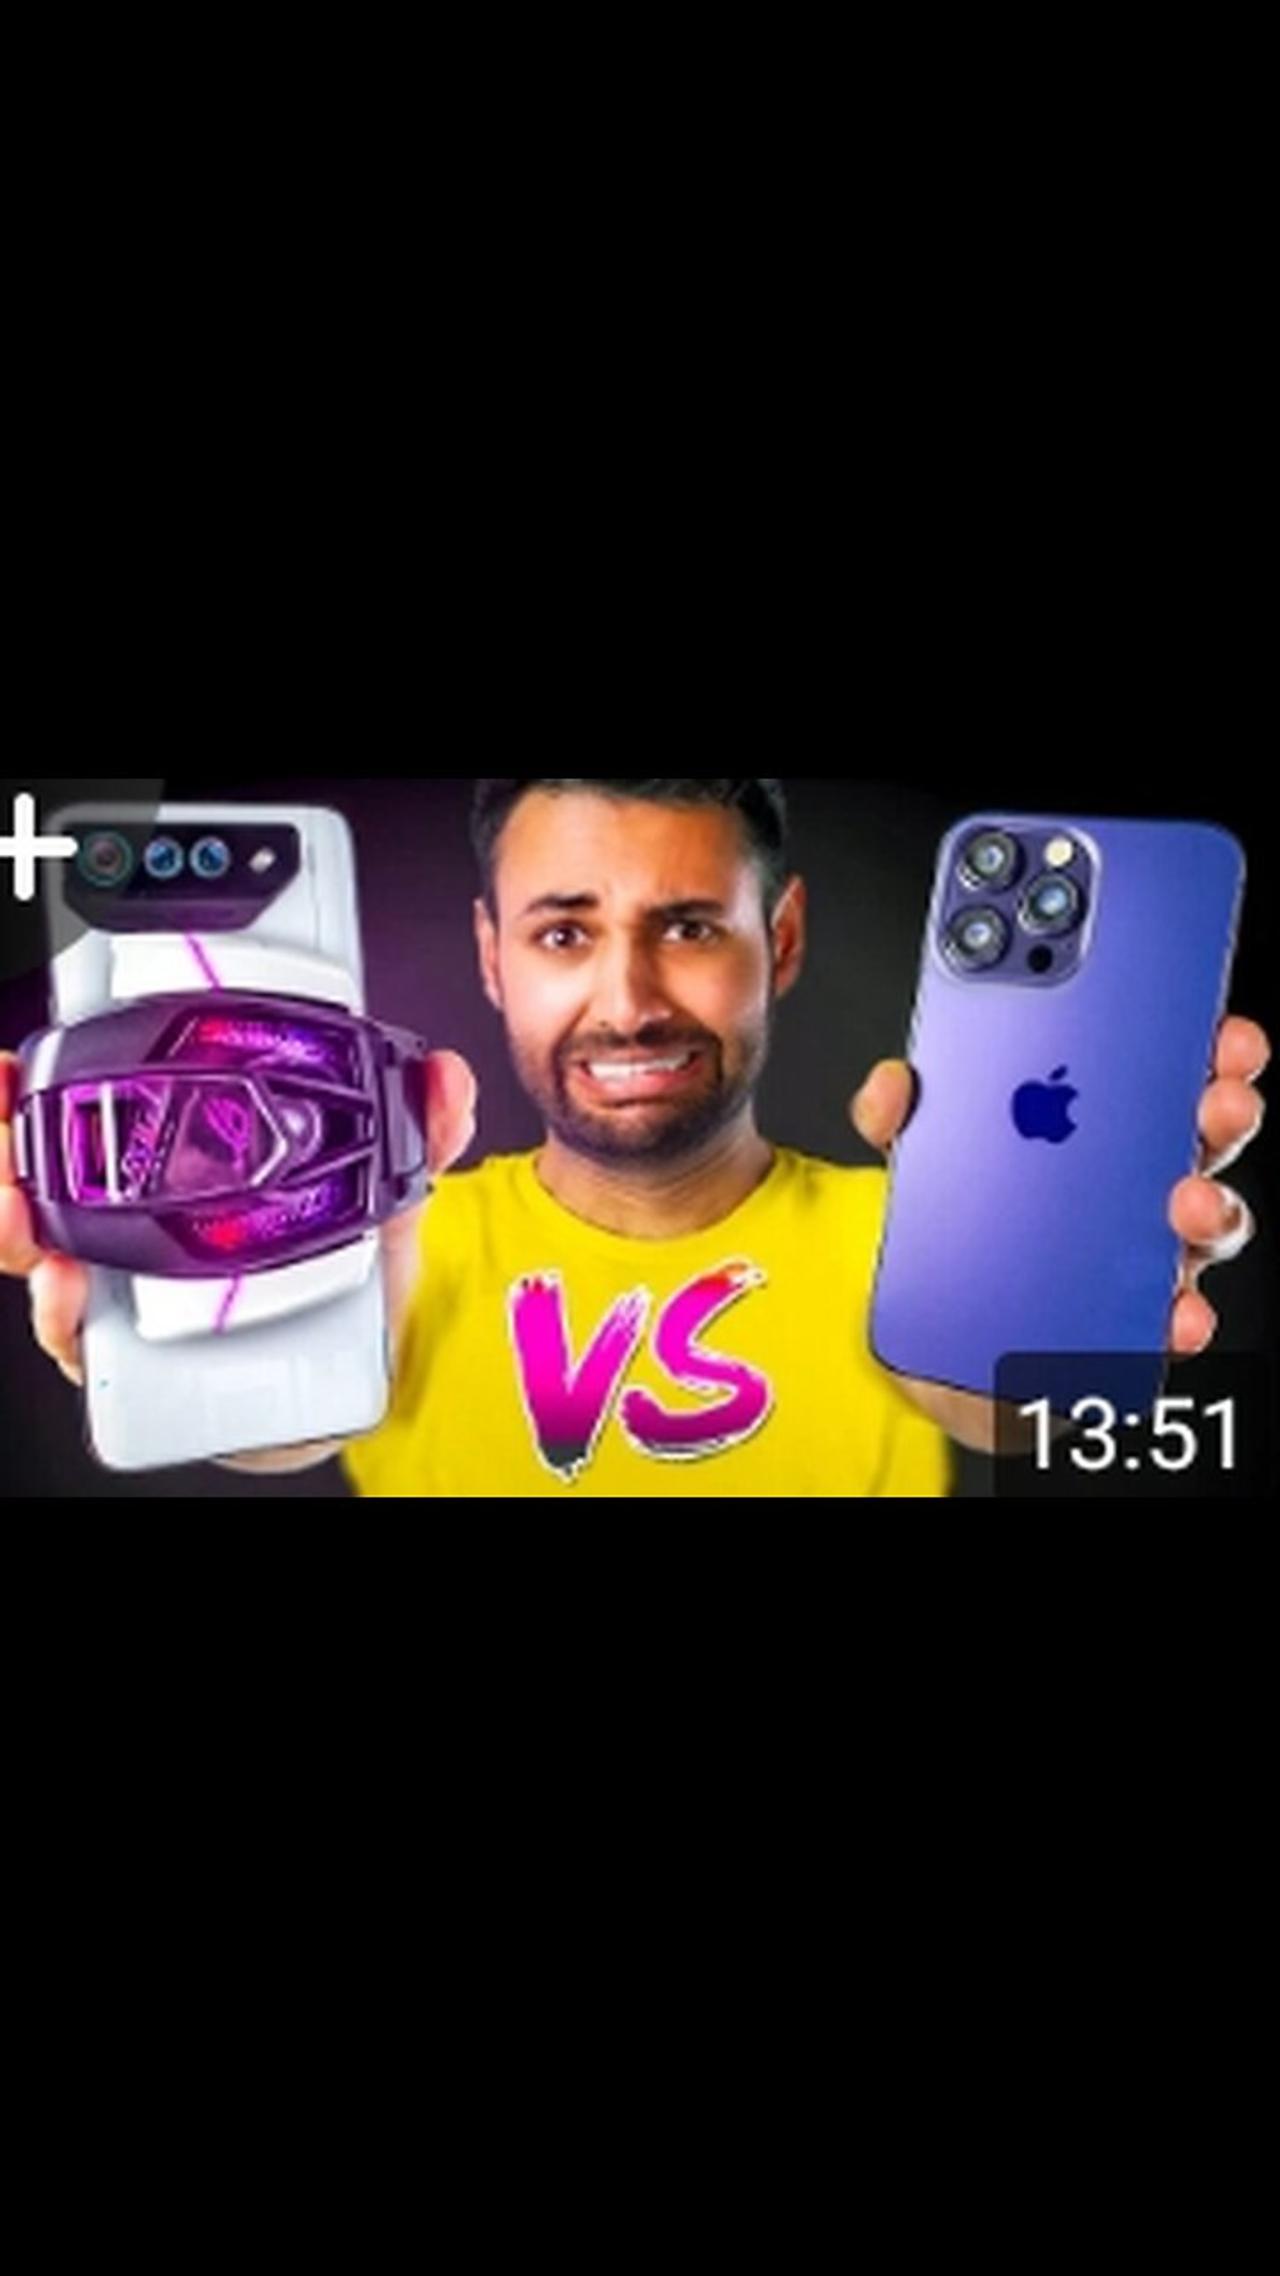 Fastest android ever Vs Iphone